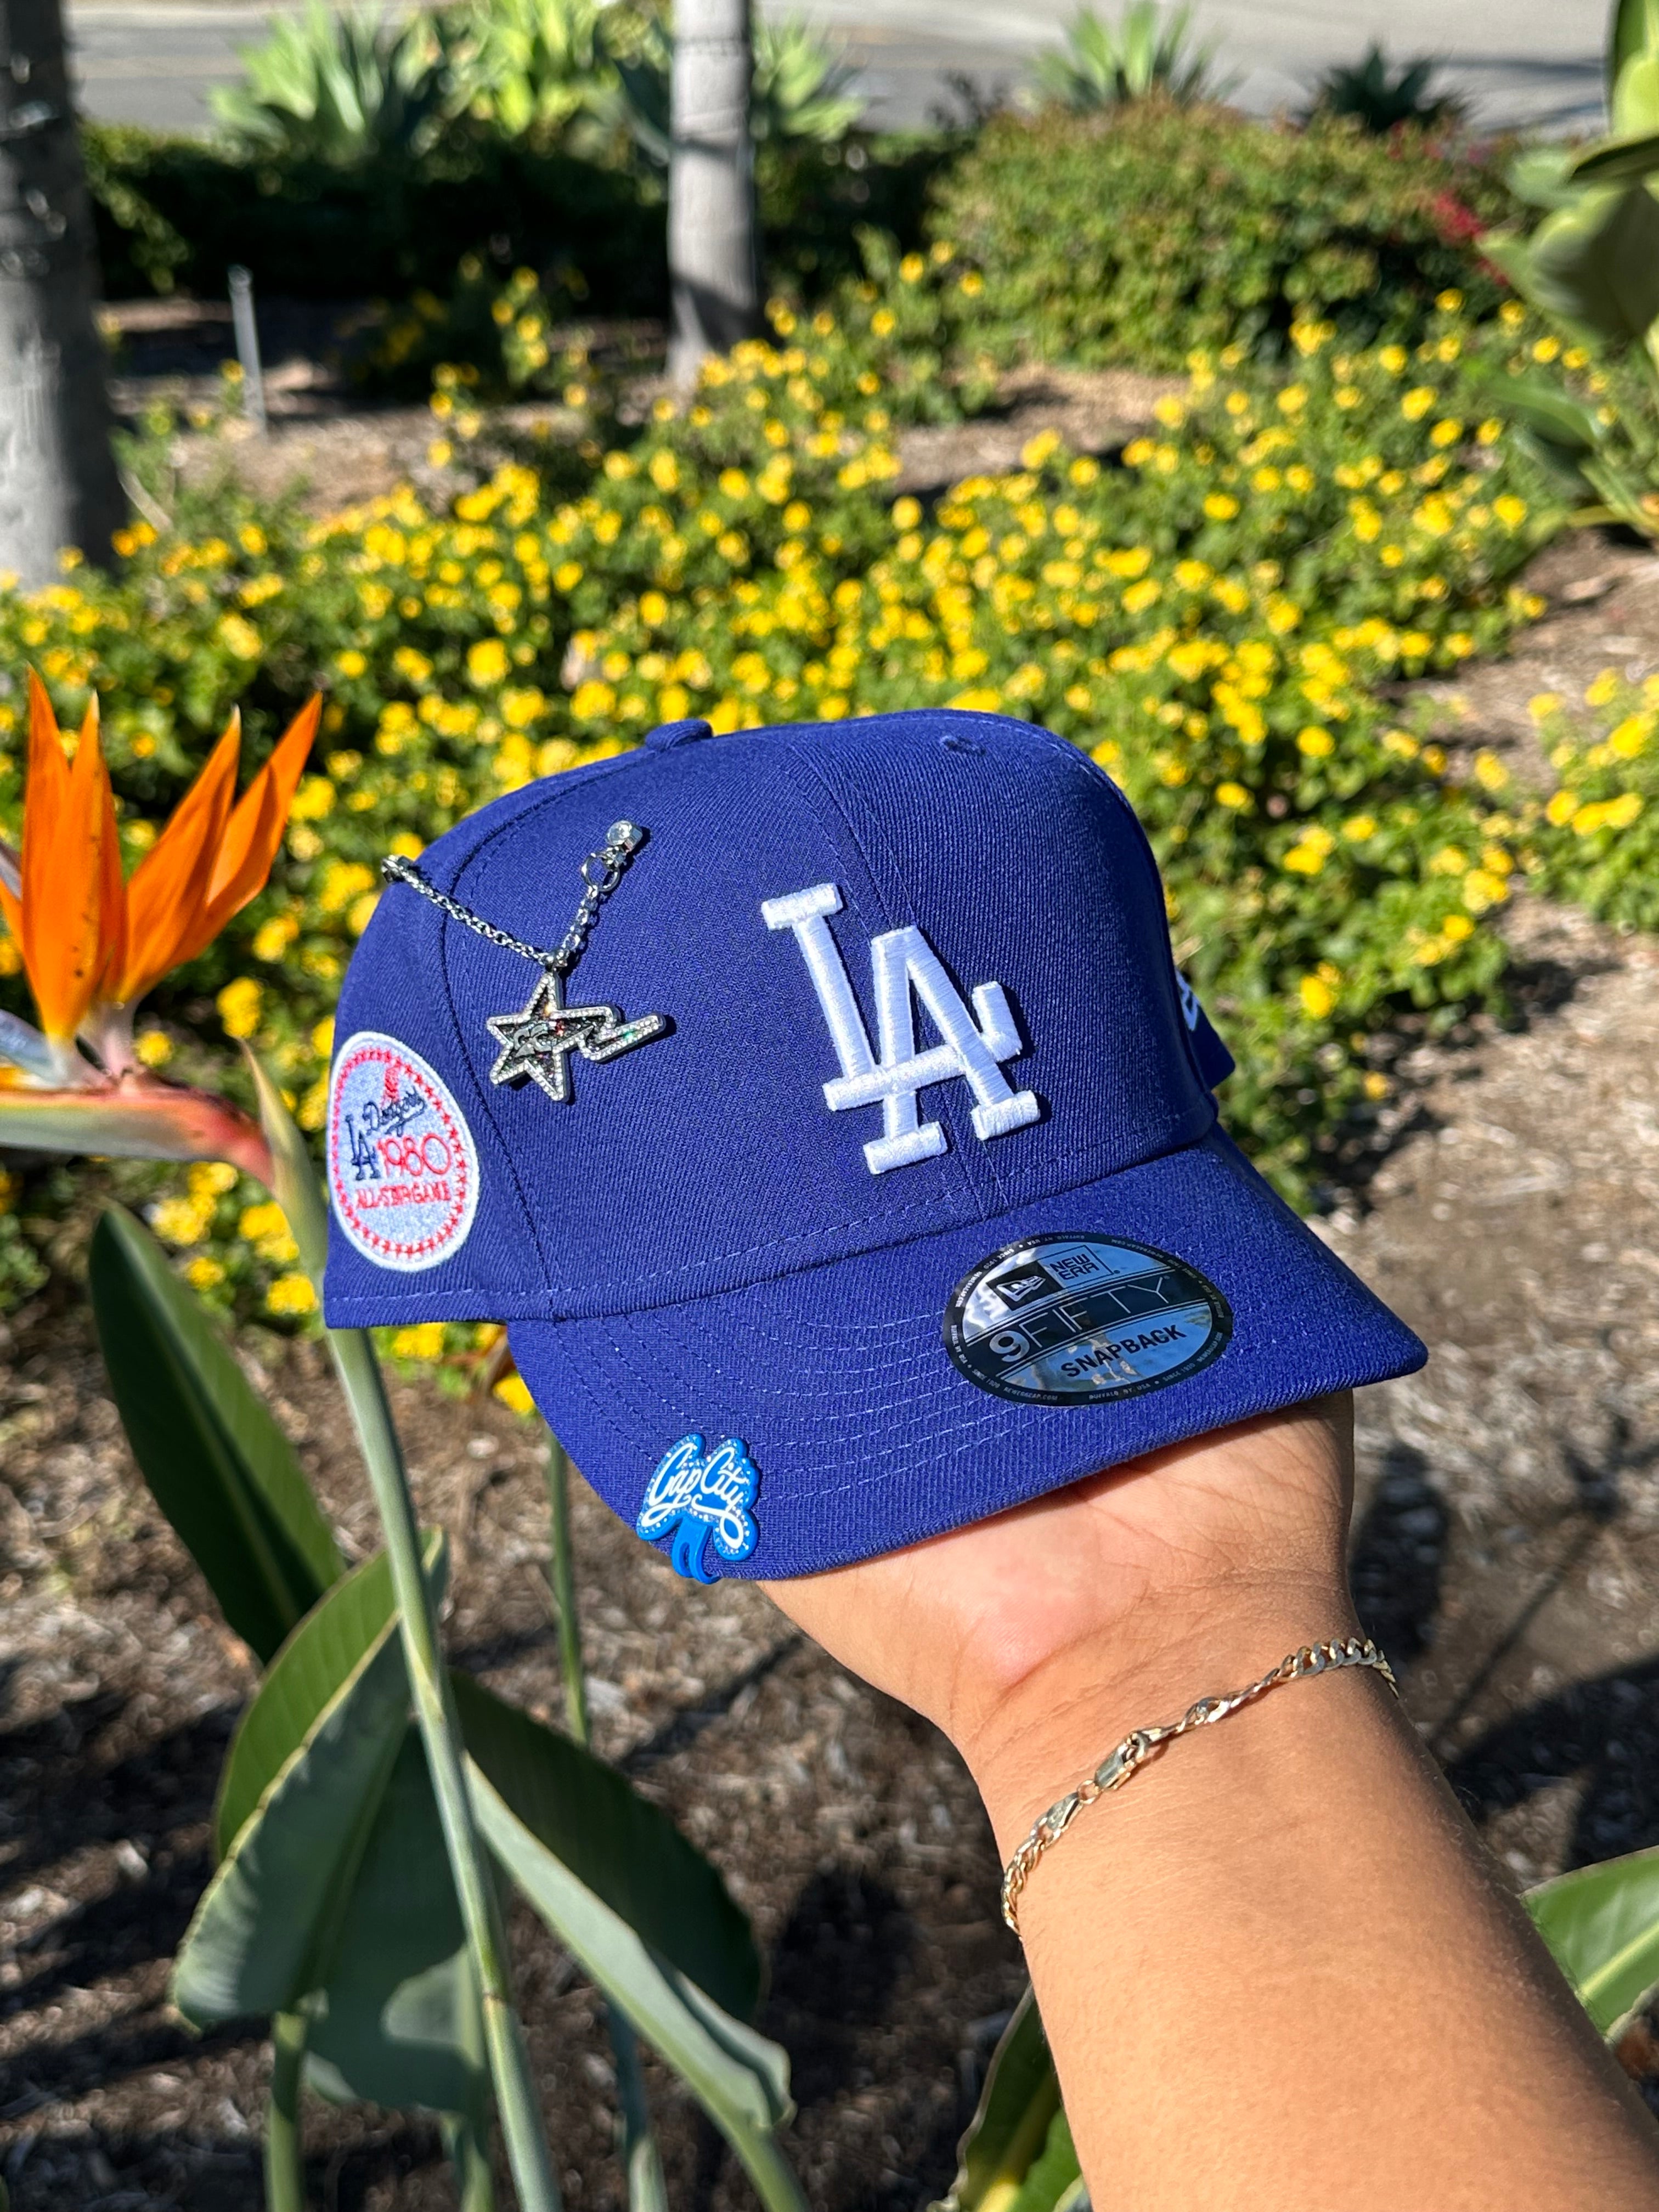 NEW ERA EXCLUSIVE 9FIFTY BLUE LOS ANGELES DODGERS SNAPBACK W/ 1980 ALL STAR GAME PATCH